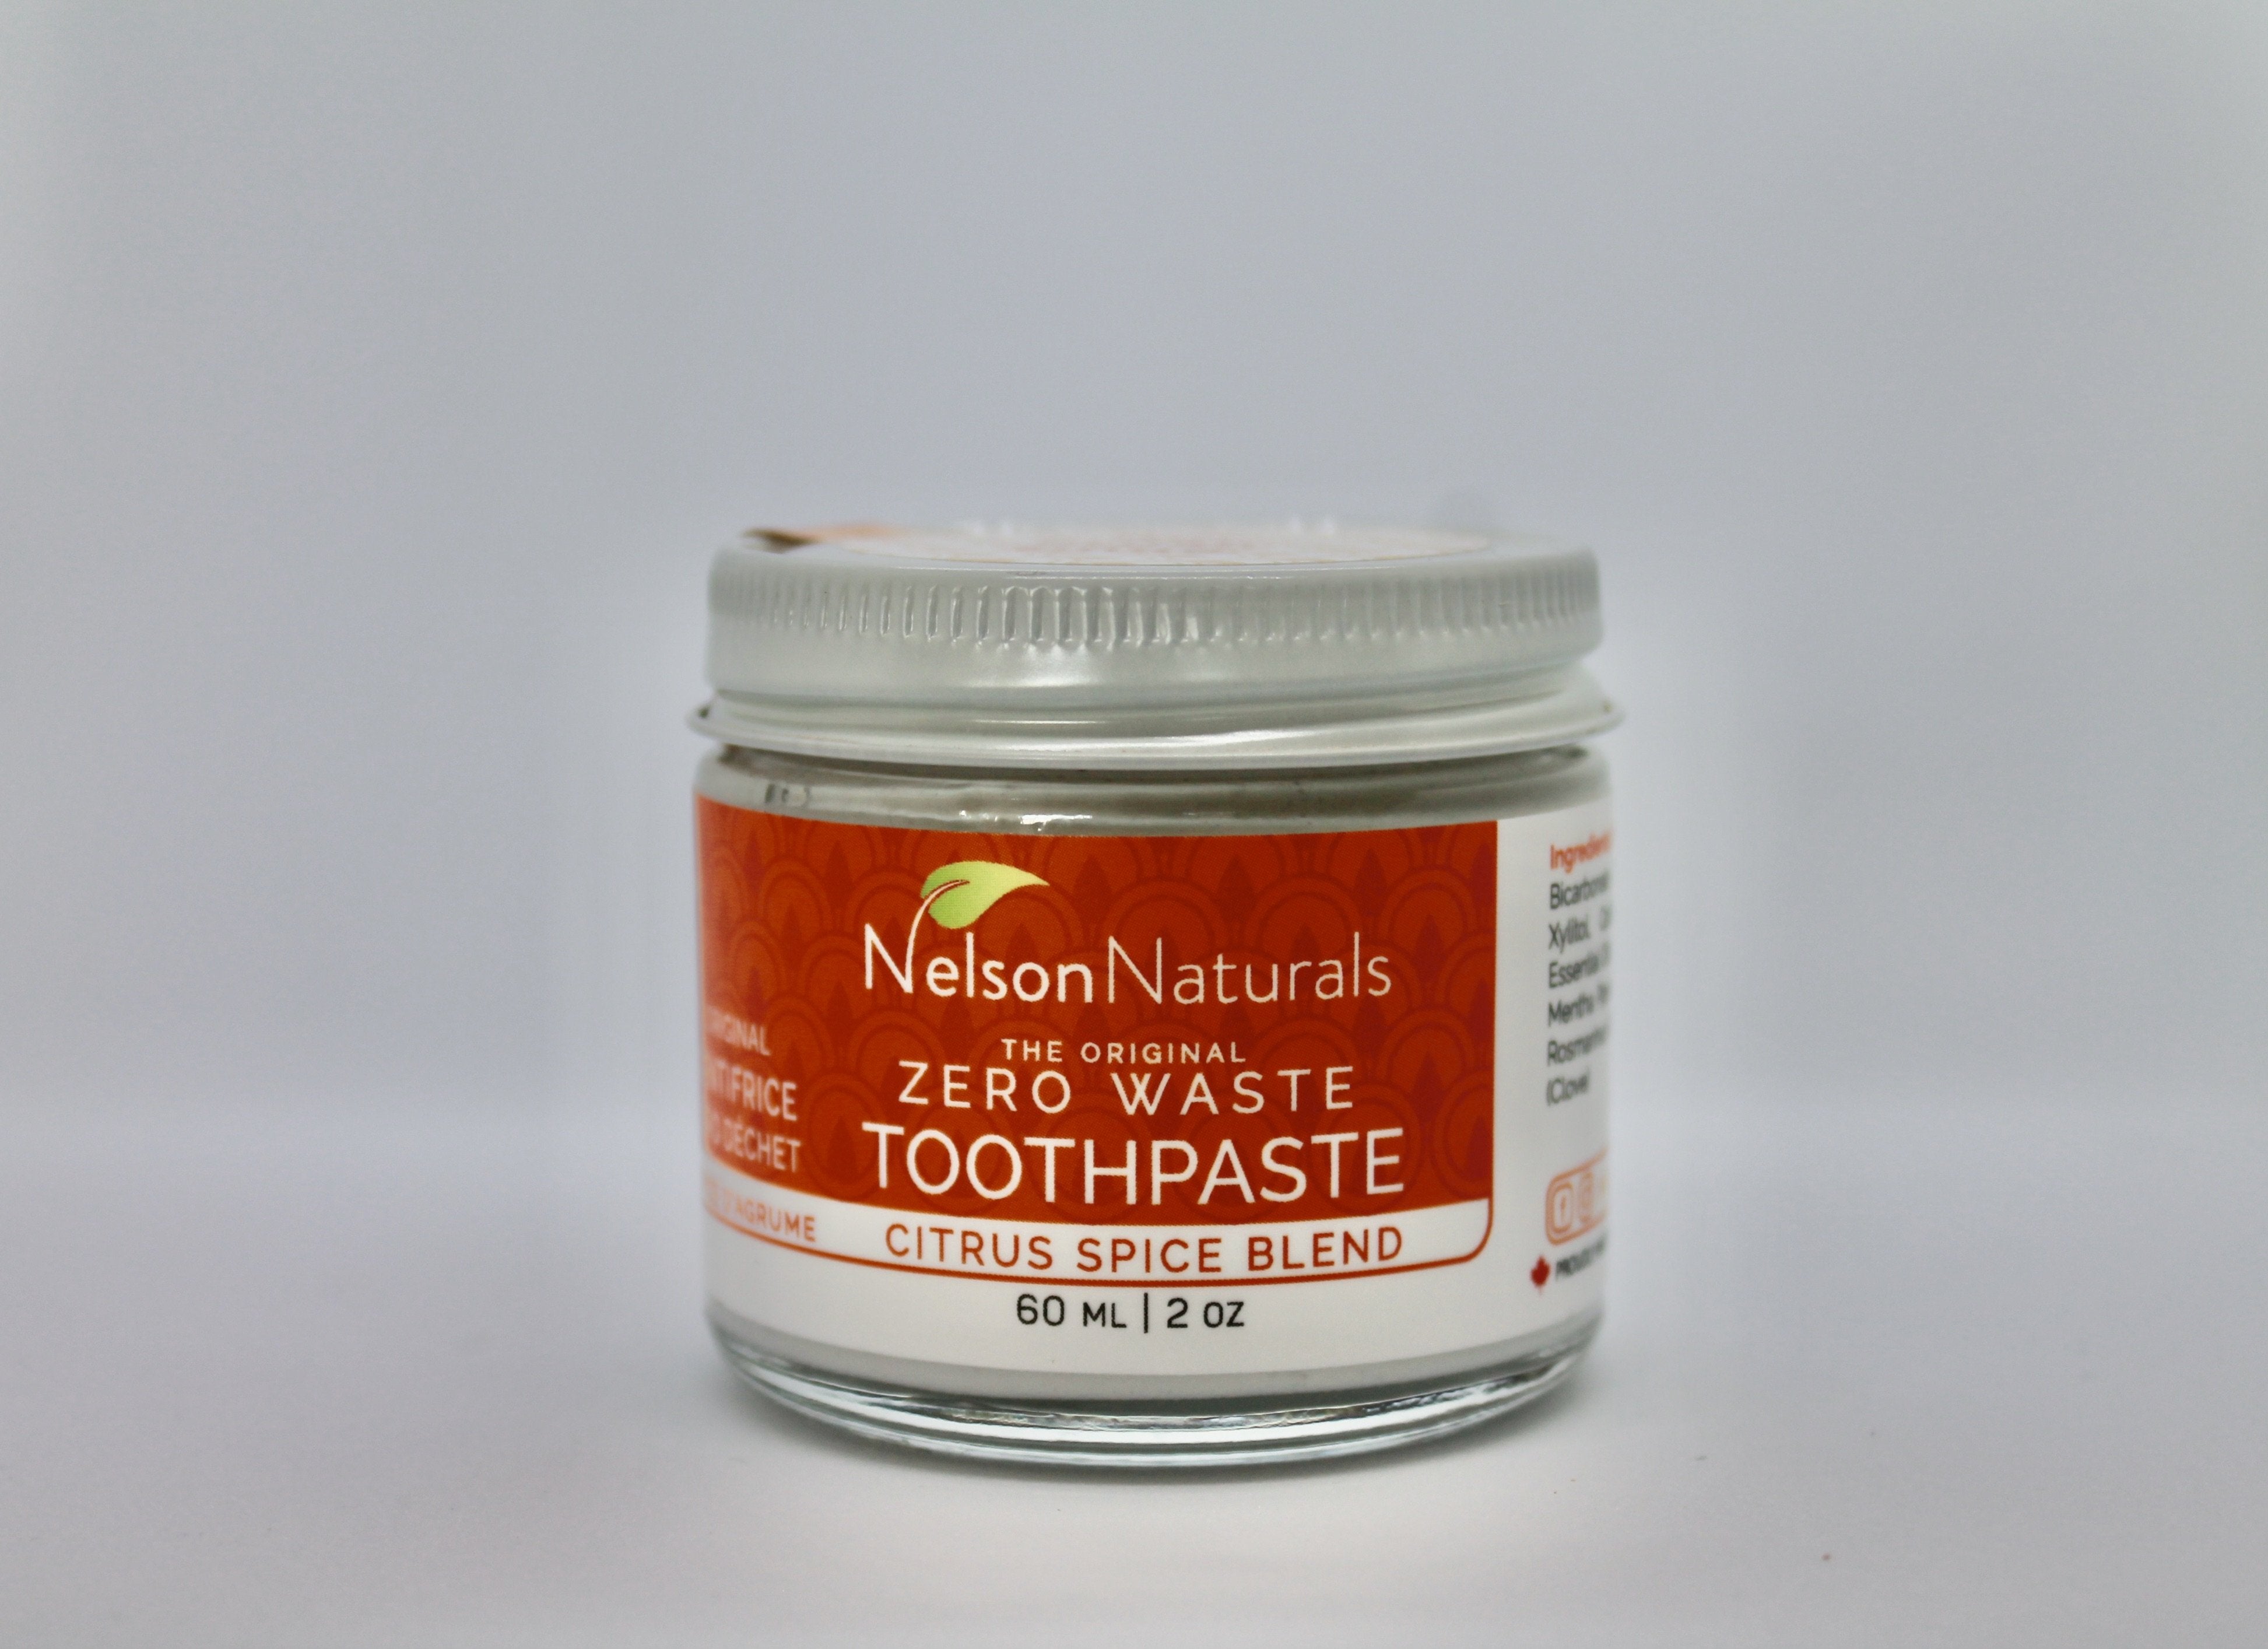 Nelson Naturals Toothpaste